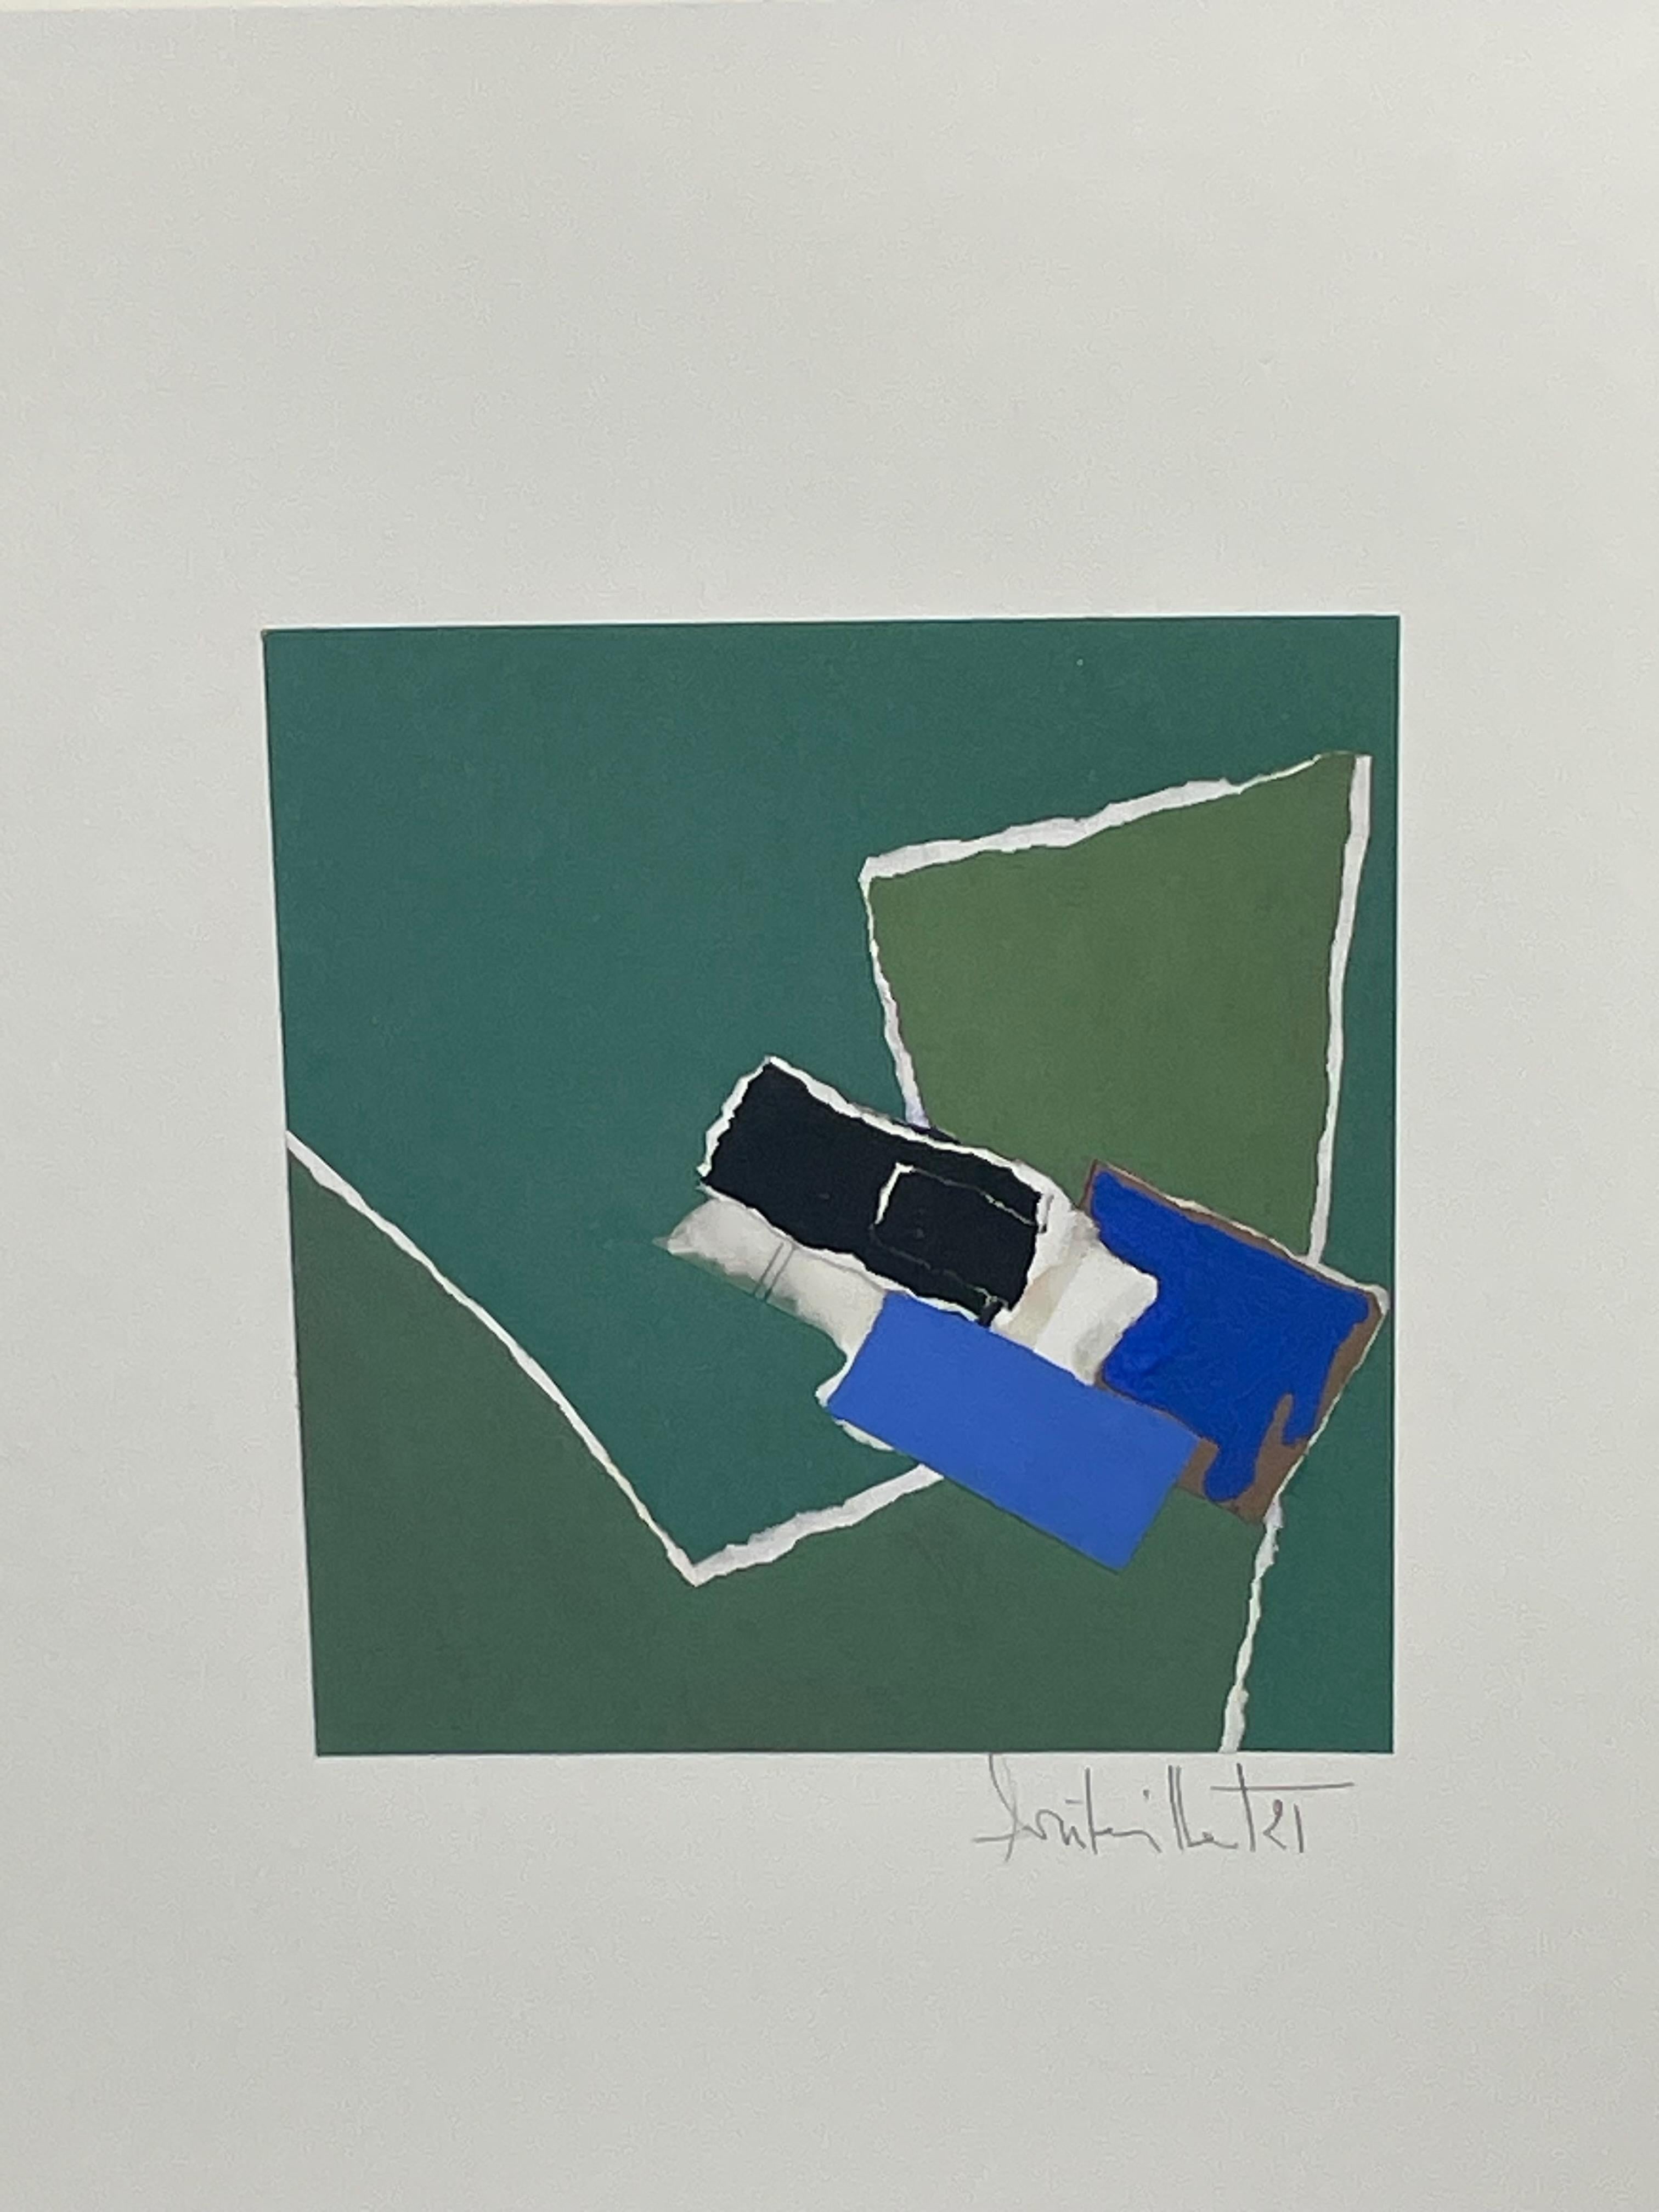 Isabelle Bouteillet is a self-taught French artist who mainly creates collages 
using mixed media materials such as acrylic, gouache and torn paper.
Colors are green, blue, black and white.
Signed by the artist.
Set back in a white wooden